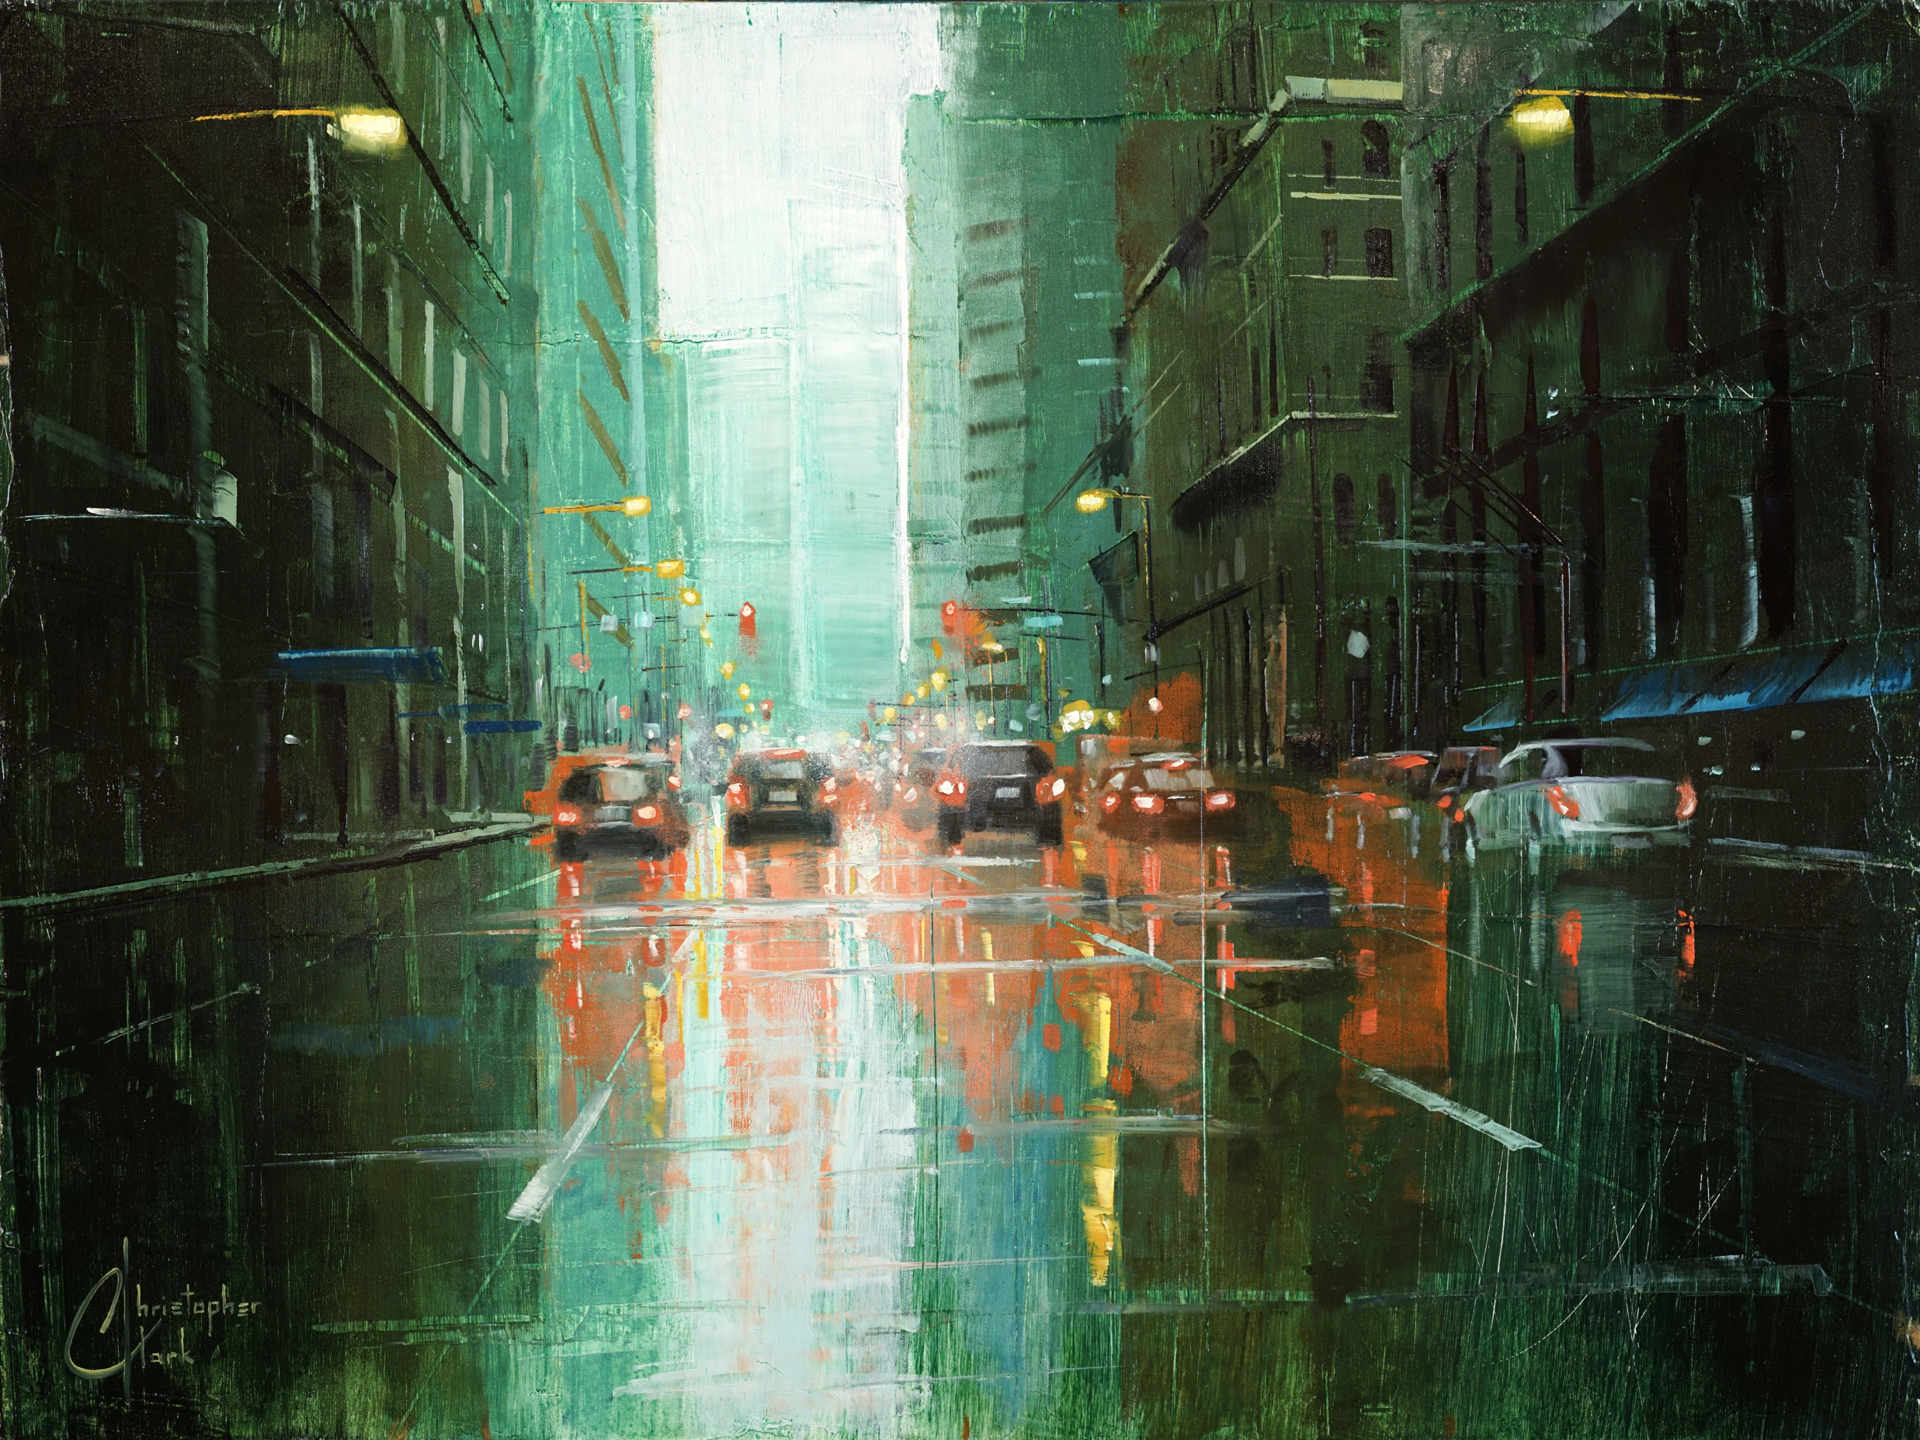 Denver - Rain in the City, 17th and Stout by Christopher Clark